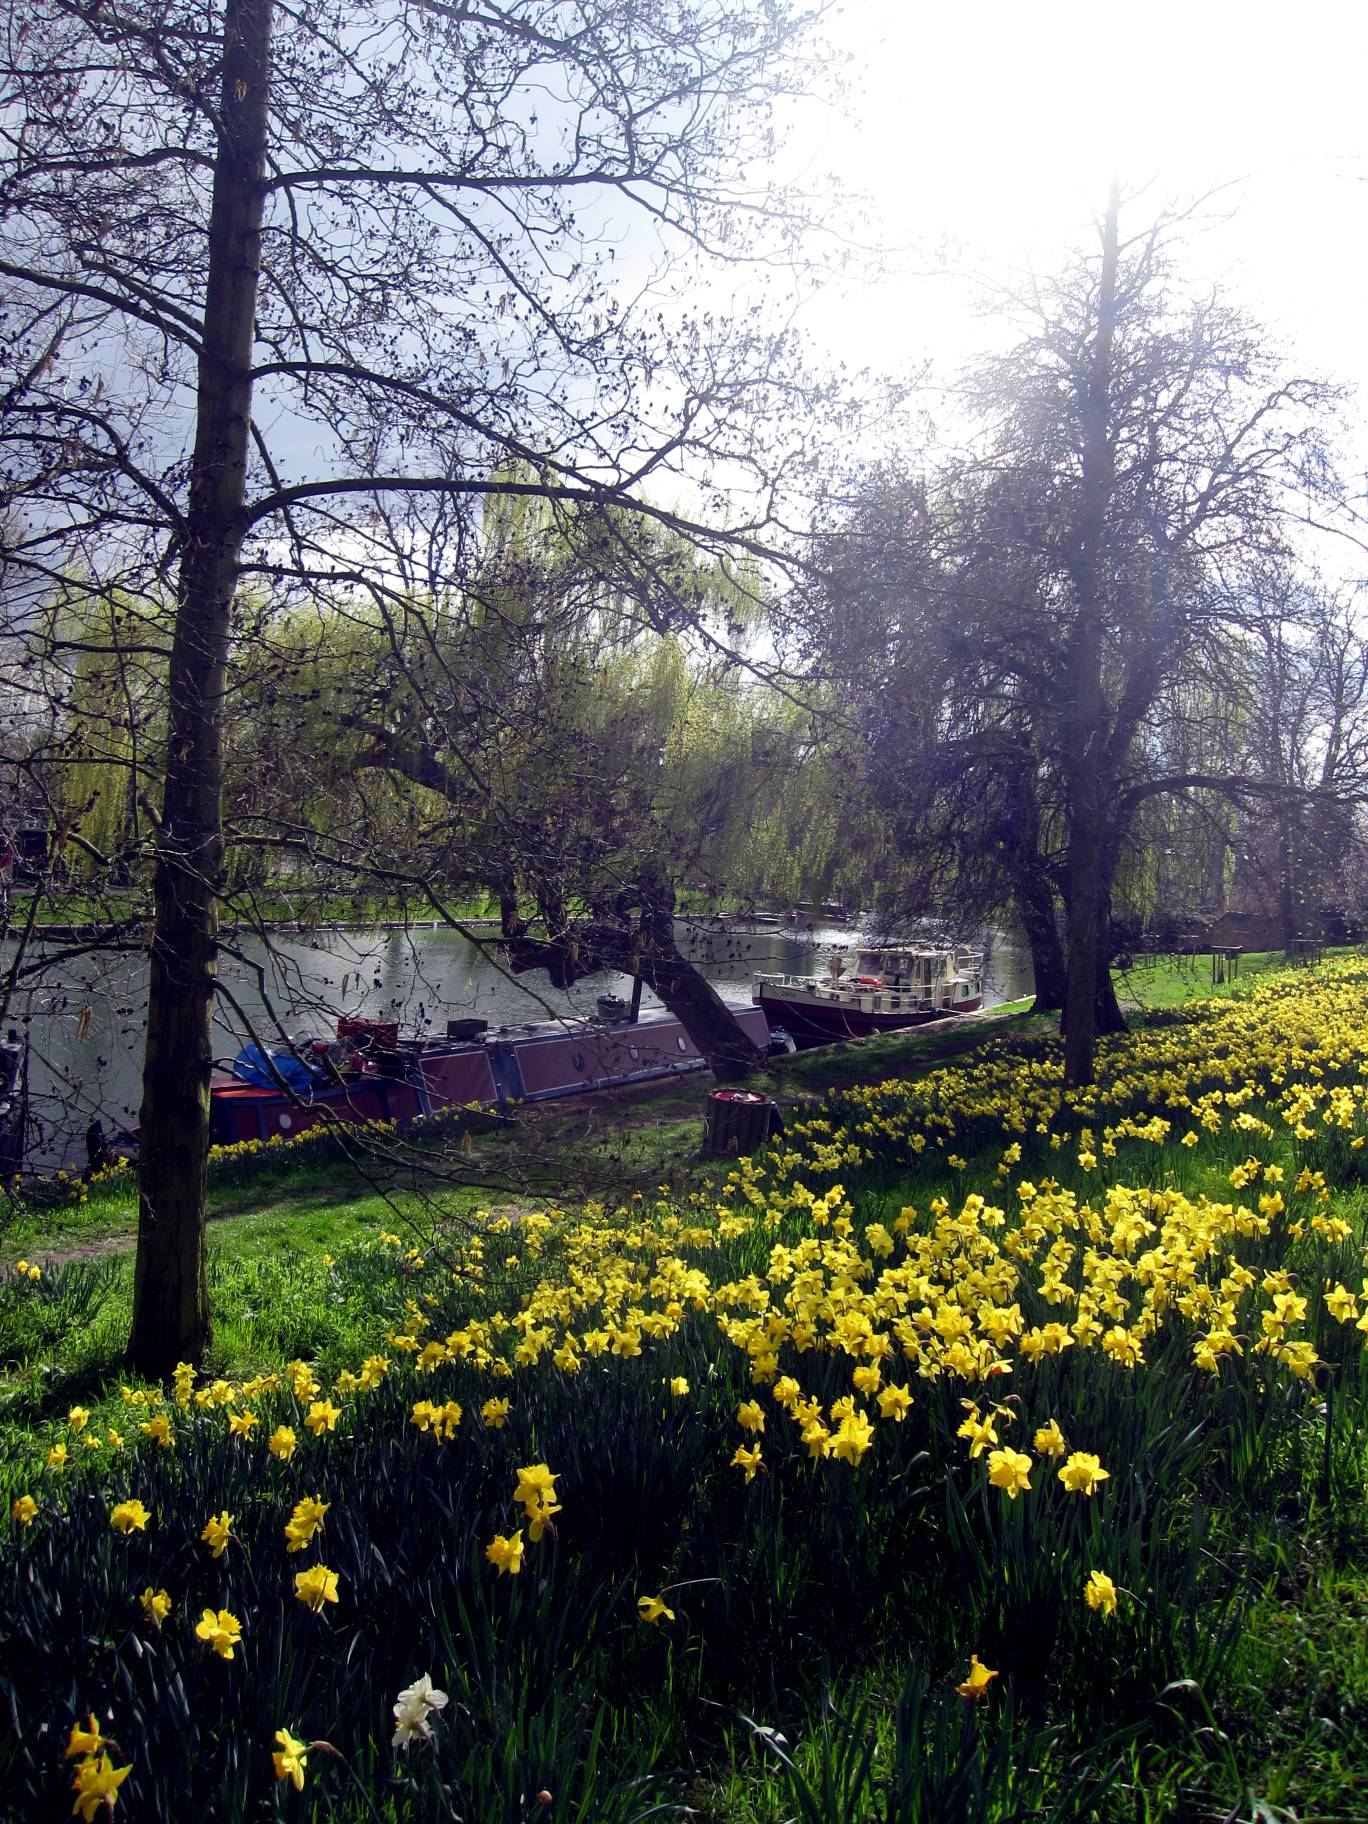 there is an image of a garden with yellow flowers